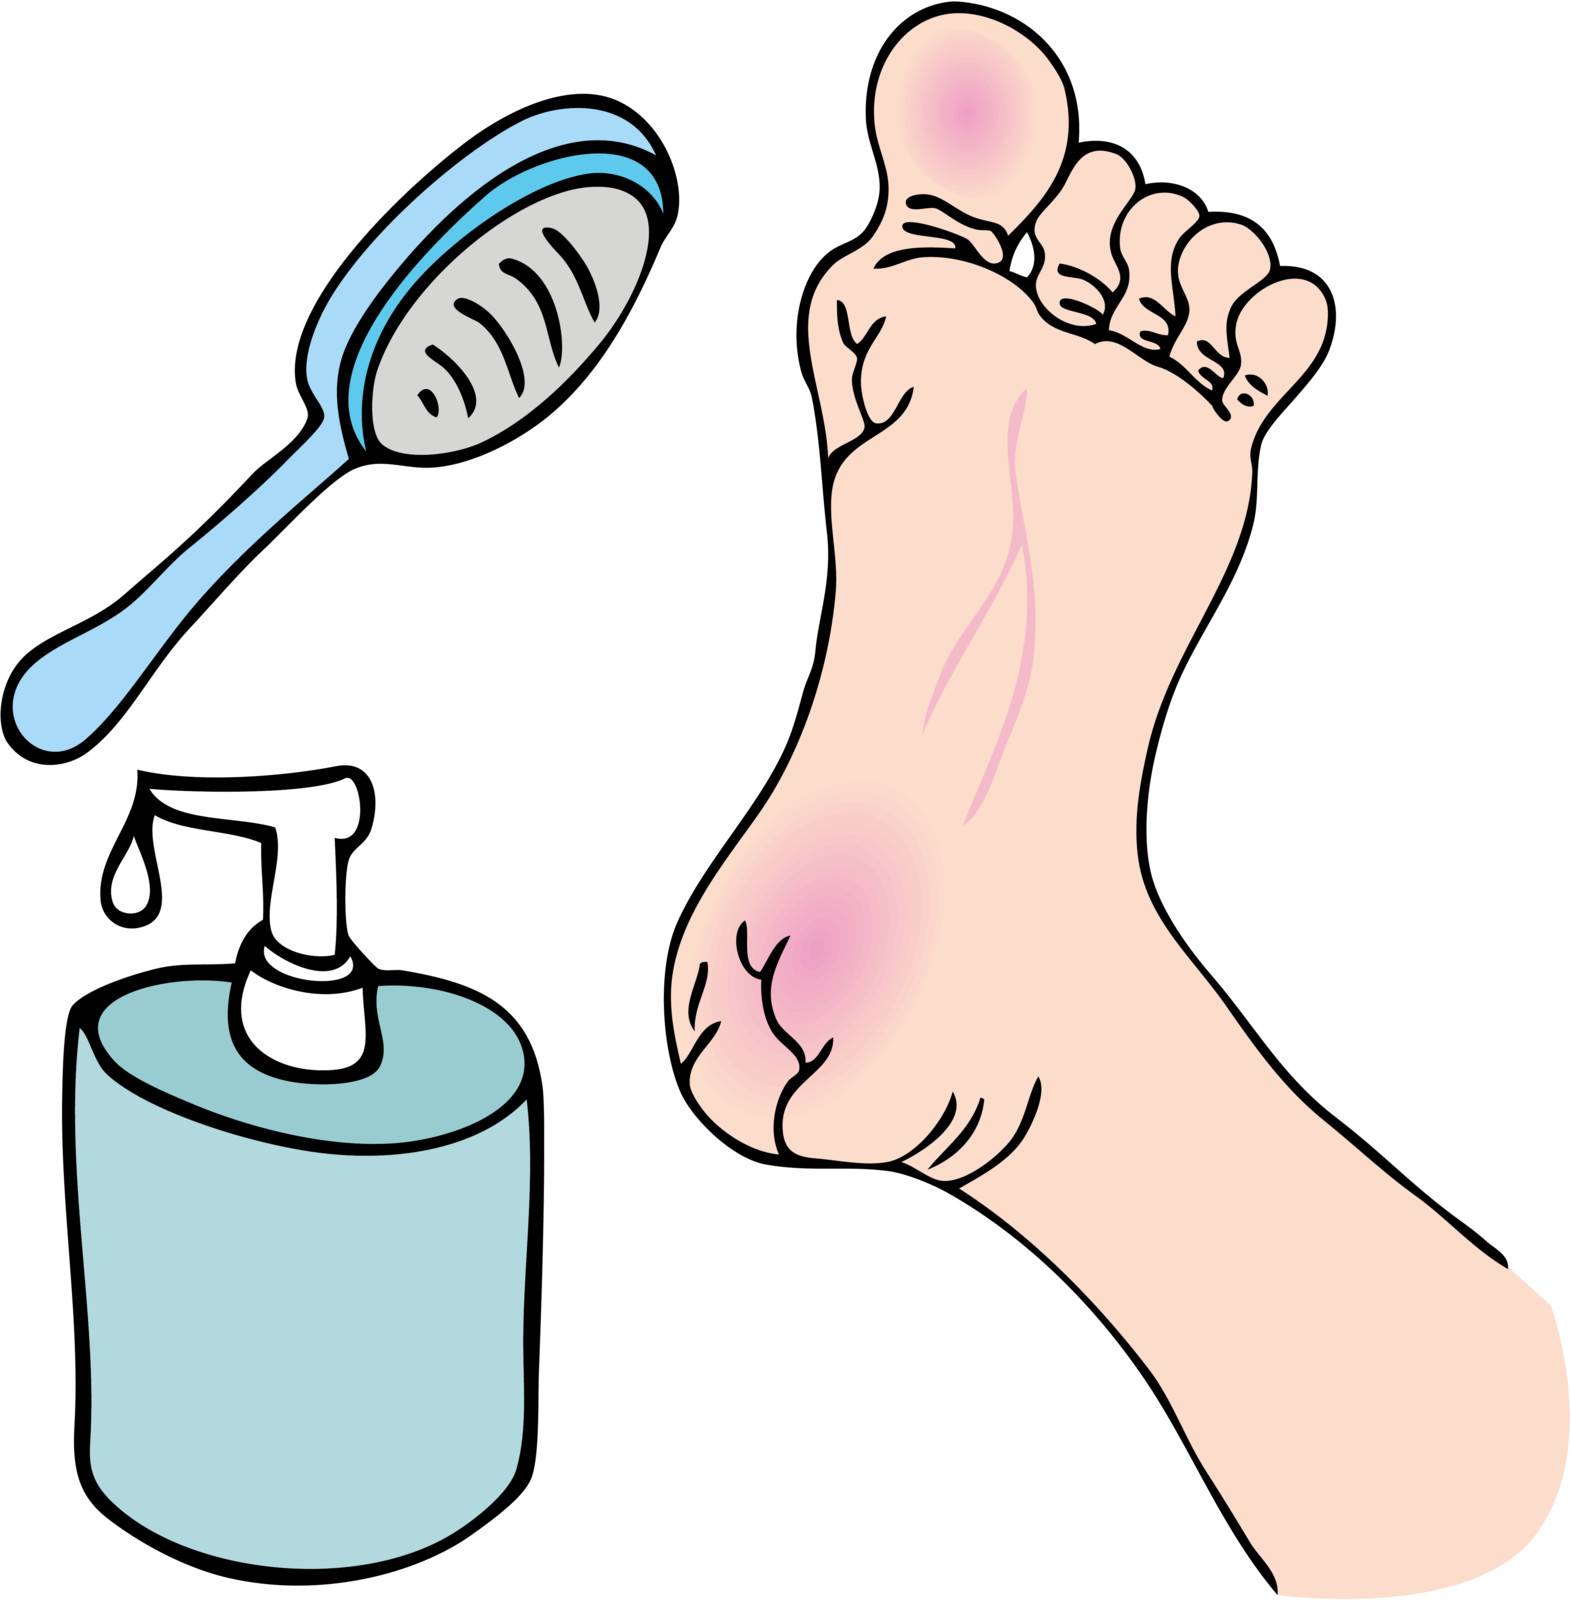 Dry Foot Treatment by cteconsulting